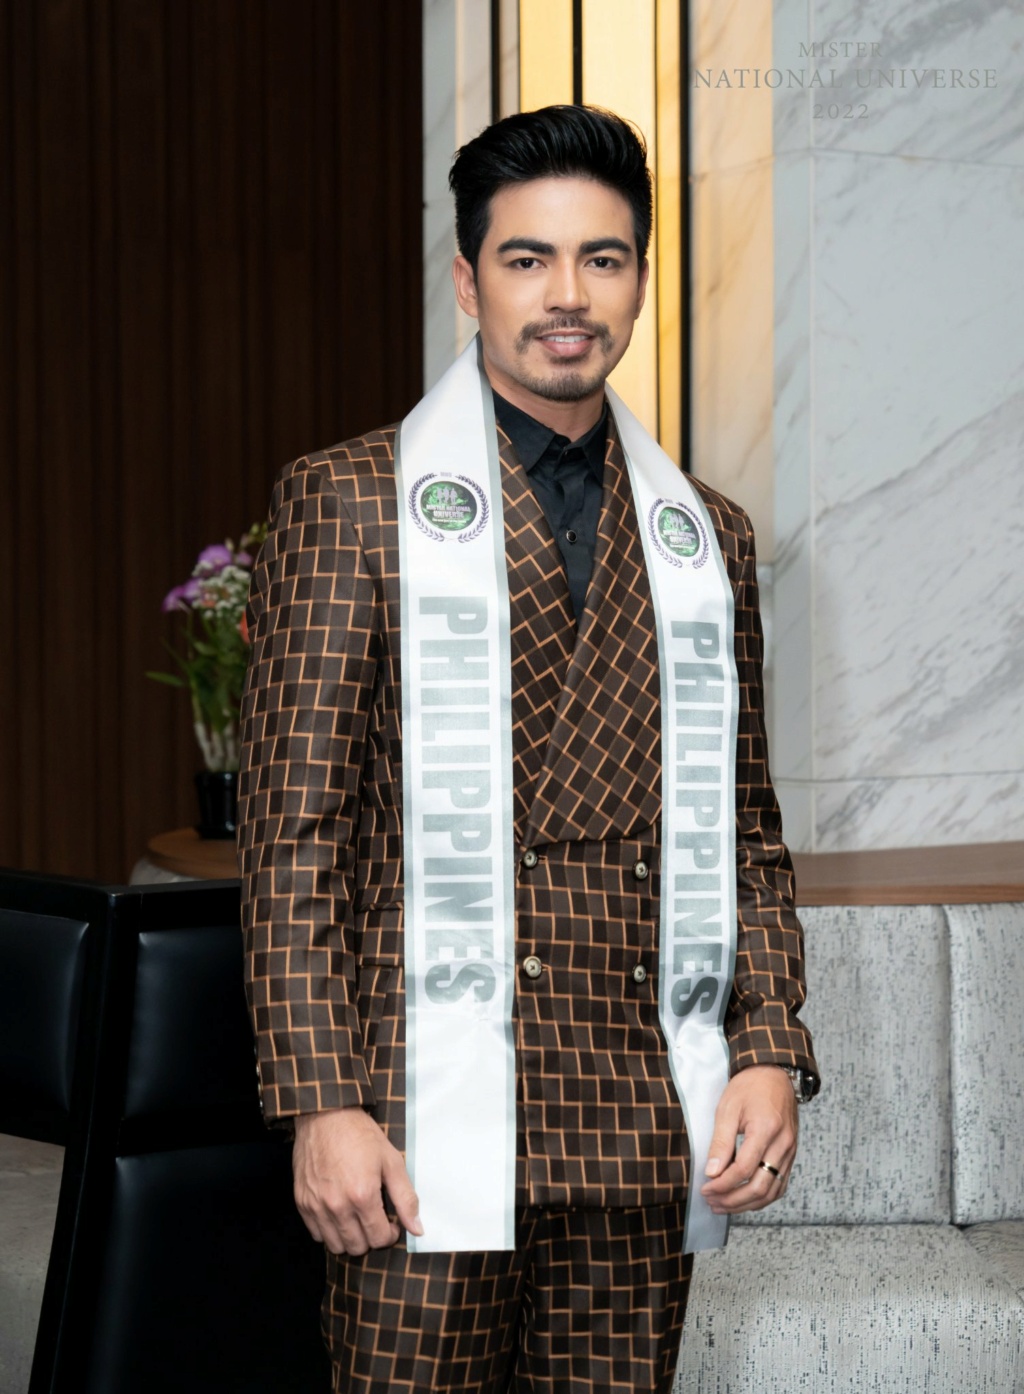 Mister National Universe 2022 is Việt Hoàng from Vietnam 28512611